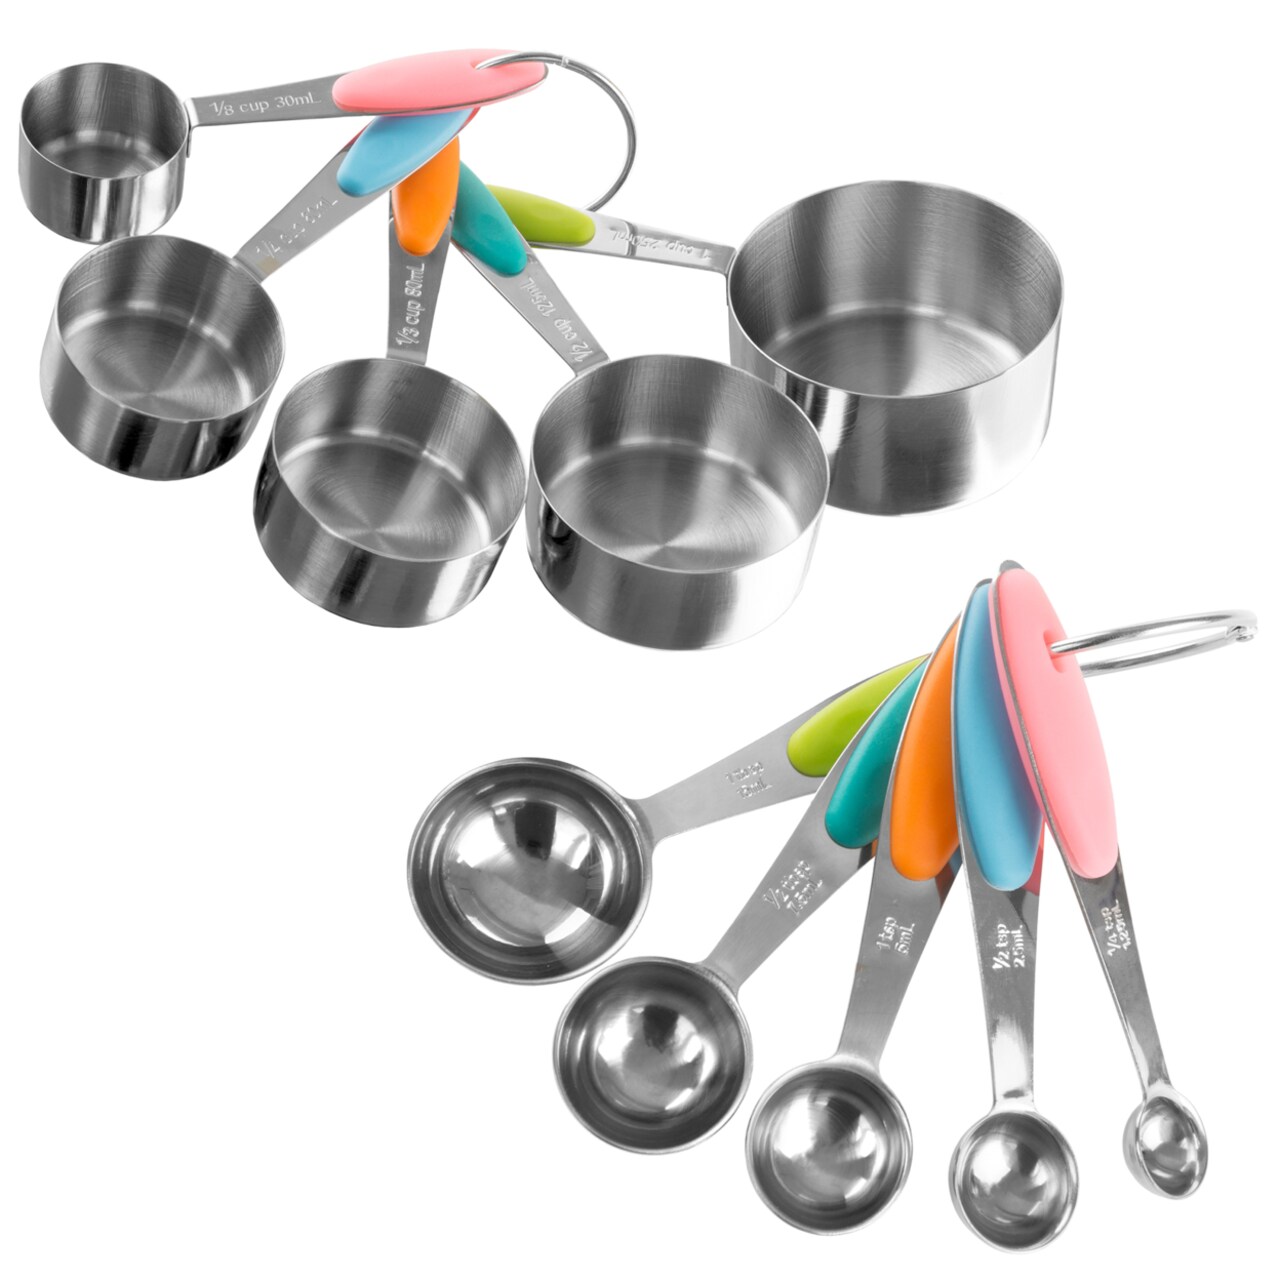 Classic Cuisine Measuring Cups and Spoons Matching Set Stainless